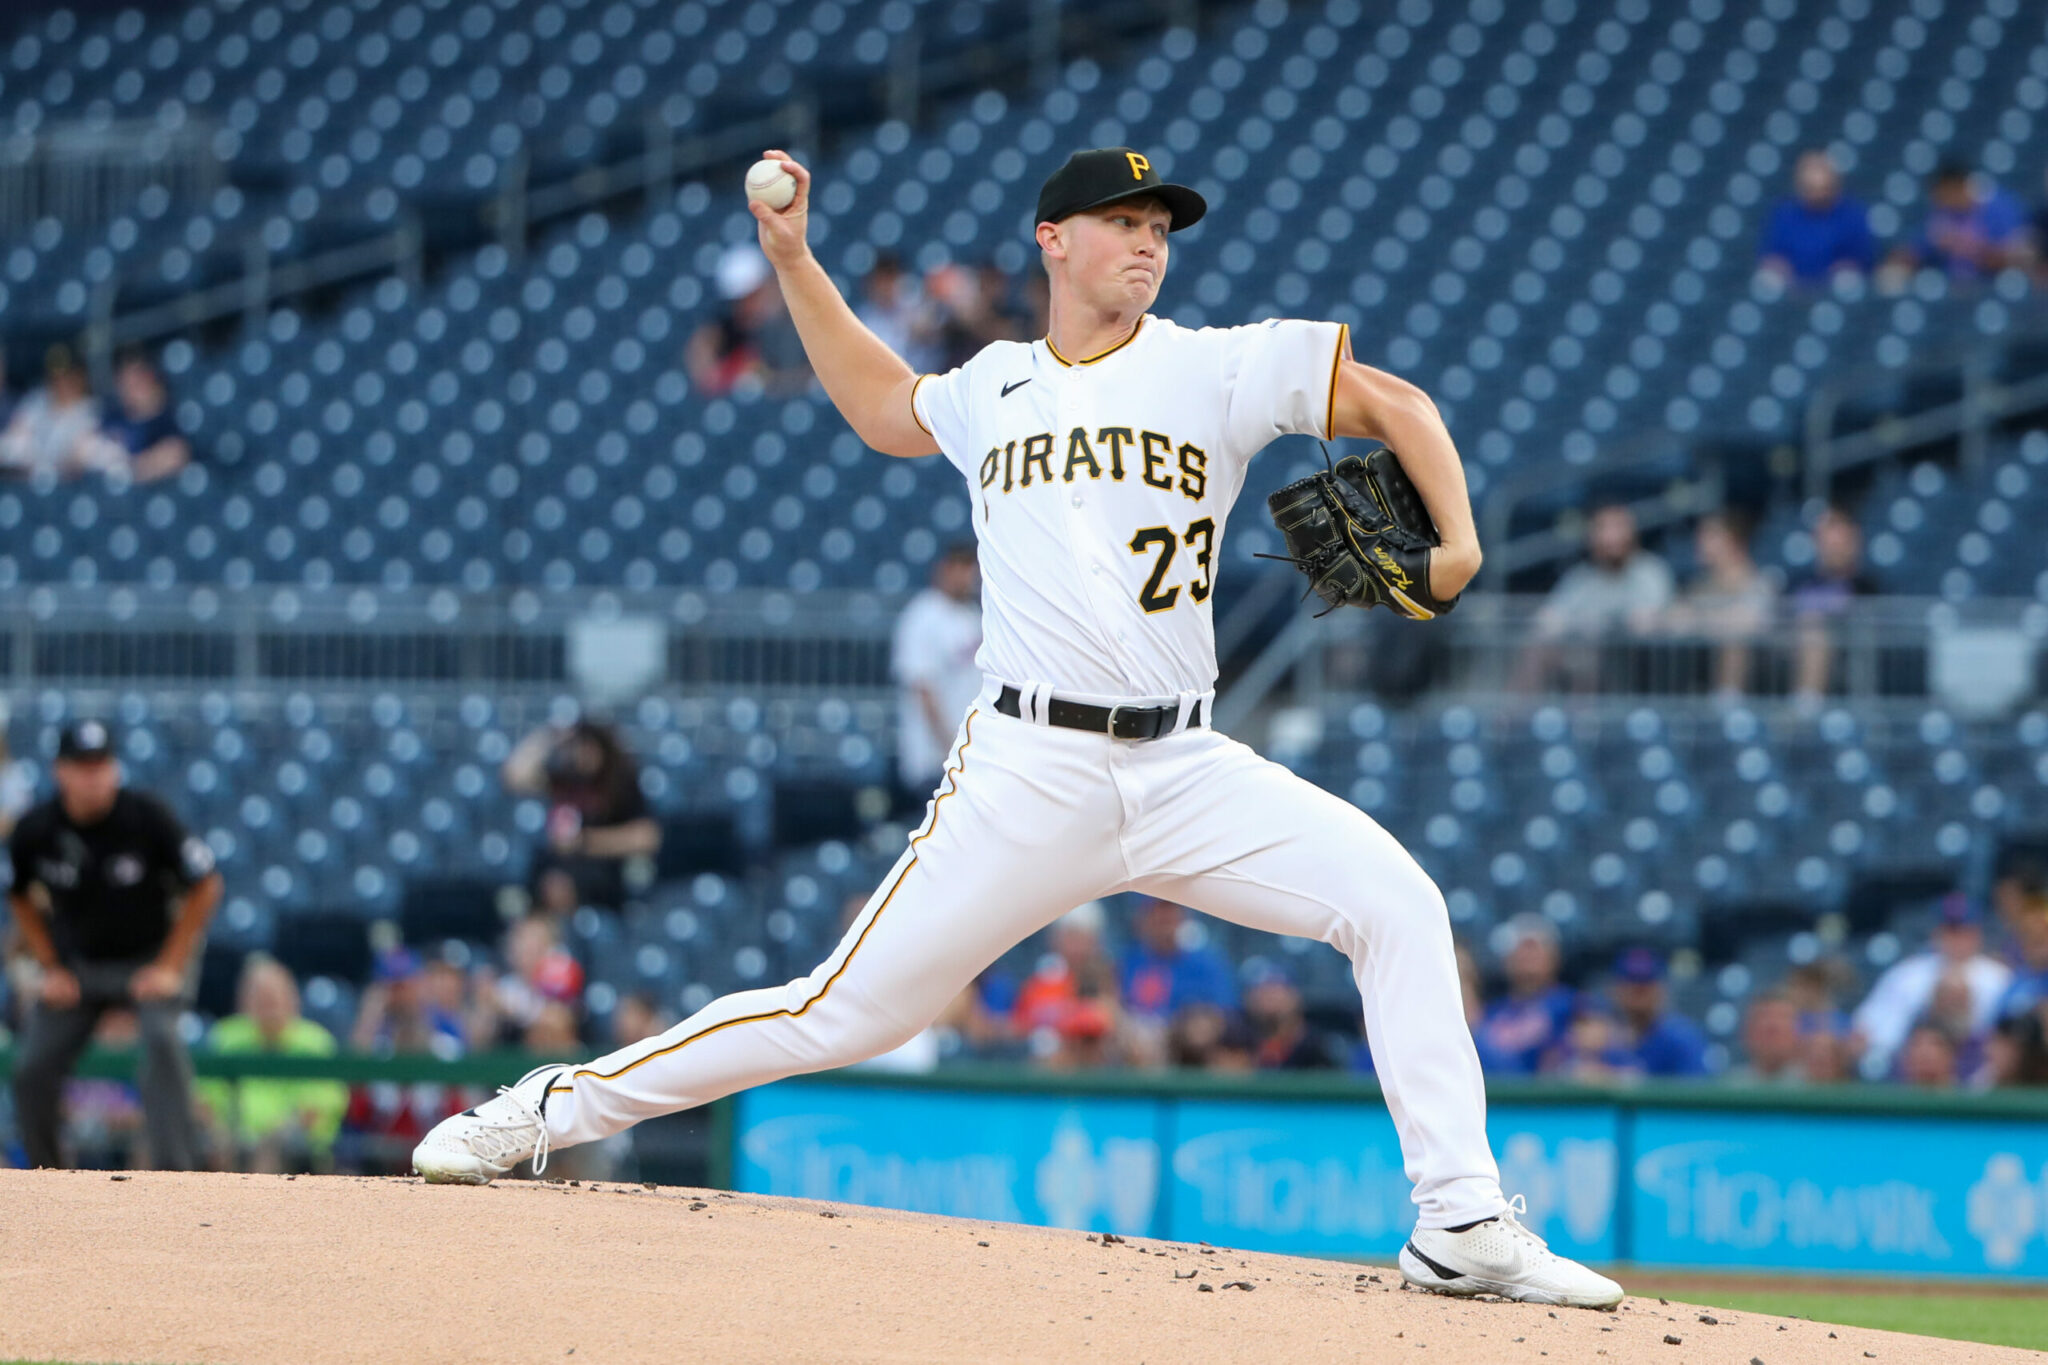 Pirates Announce That They Have Avoided Arbitration with Four Players